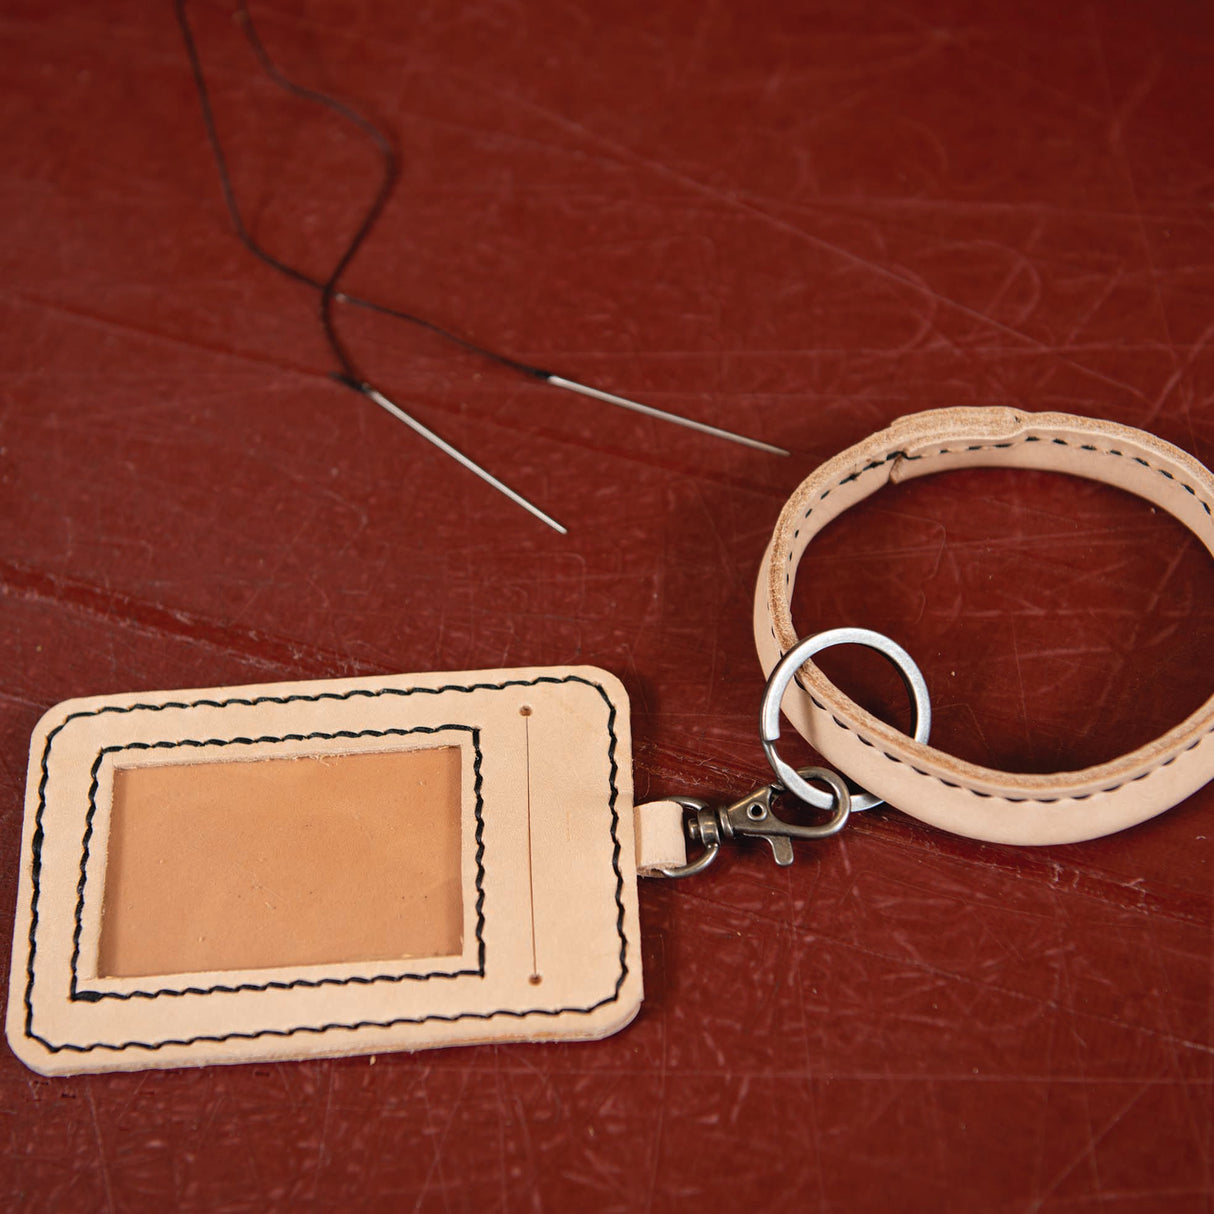 Natural Vegetable Tanned Leather - Weaver Leather Supply